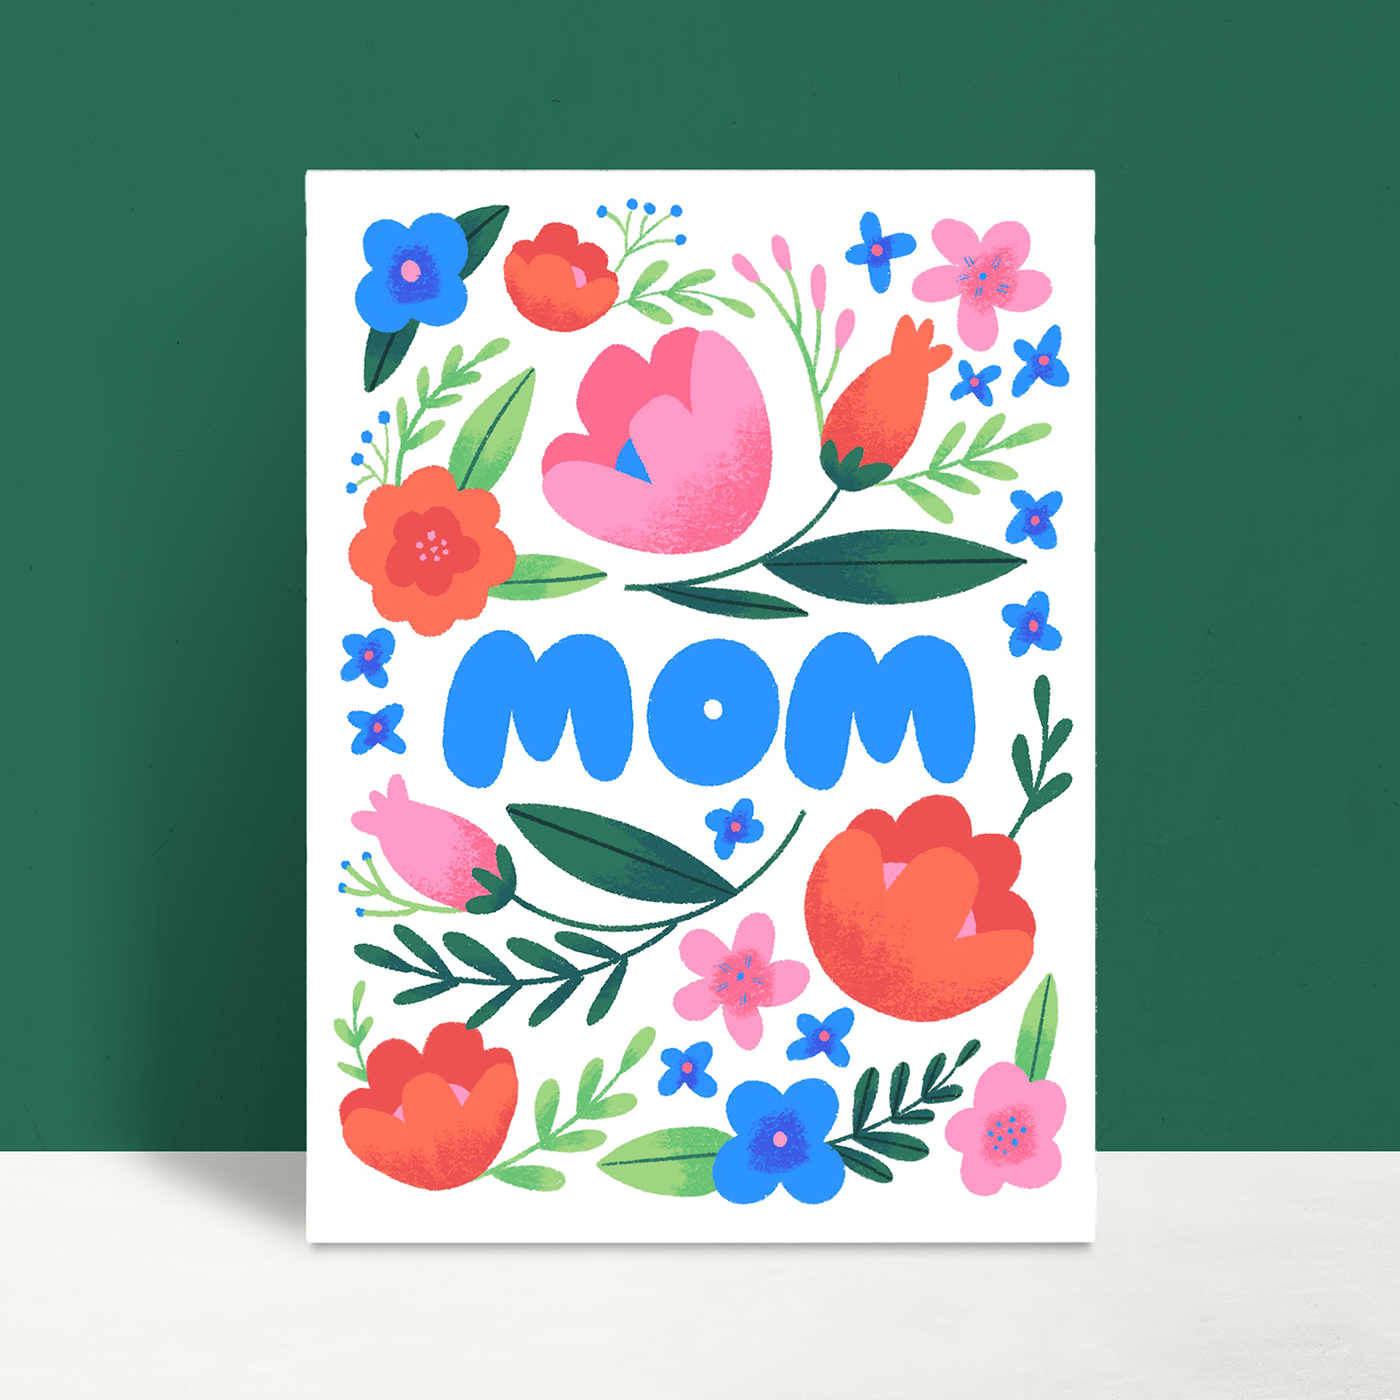 cards celebrate greeting cards holidays ILLUSTRATION  Mama moms moms day mothers day stationary